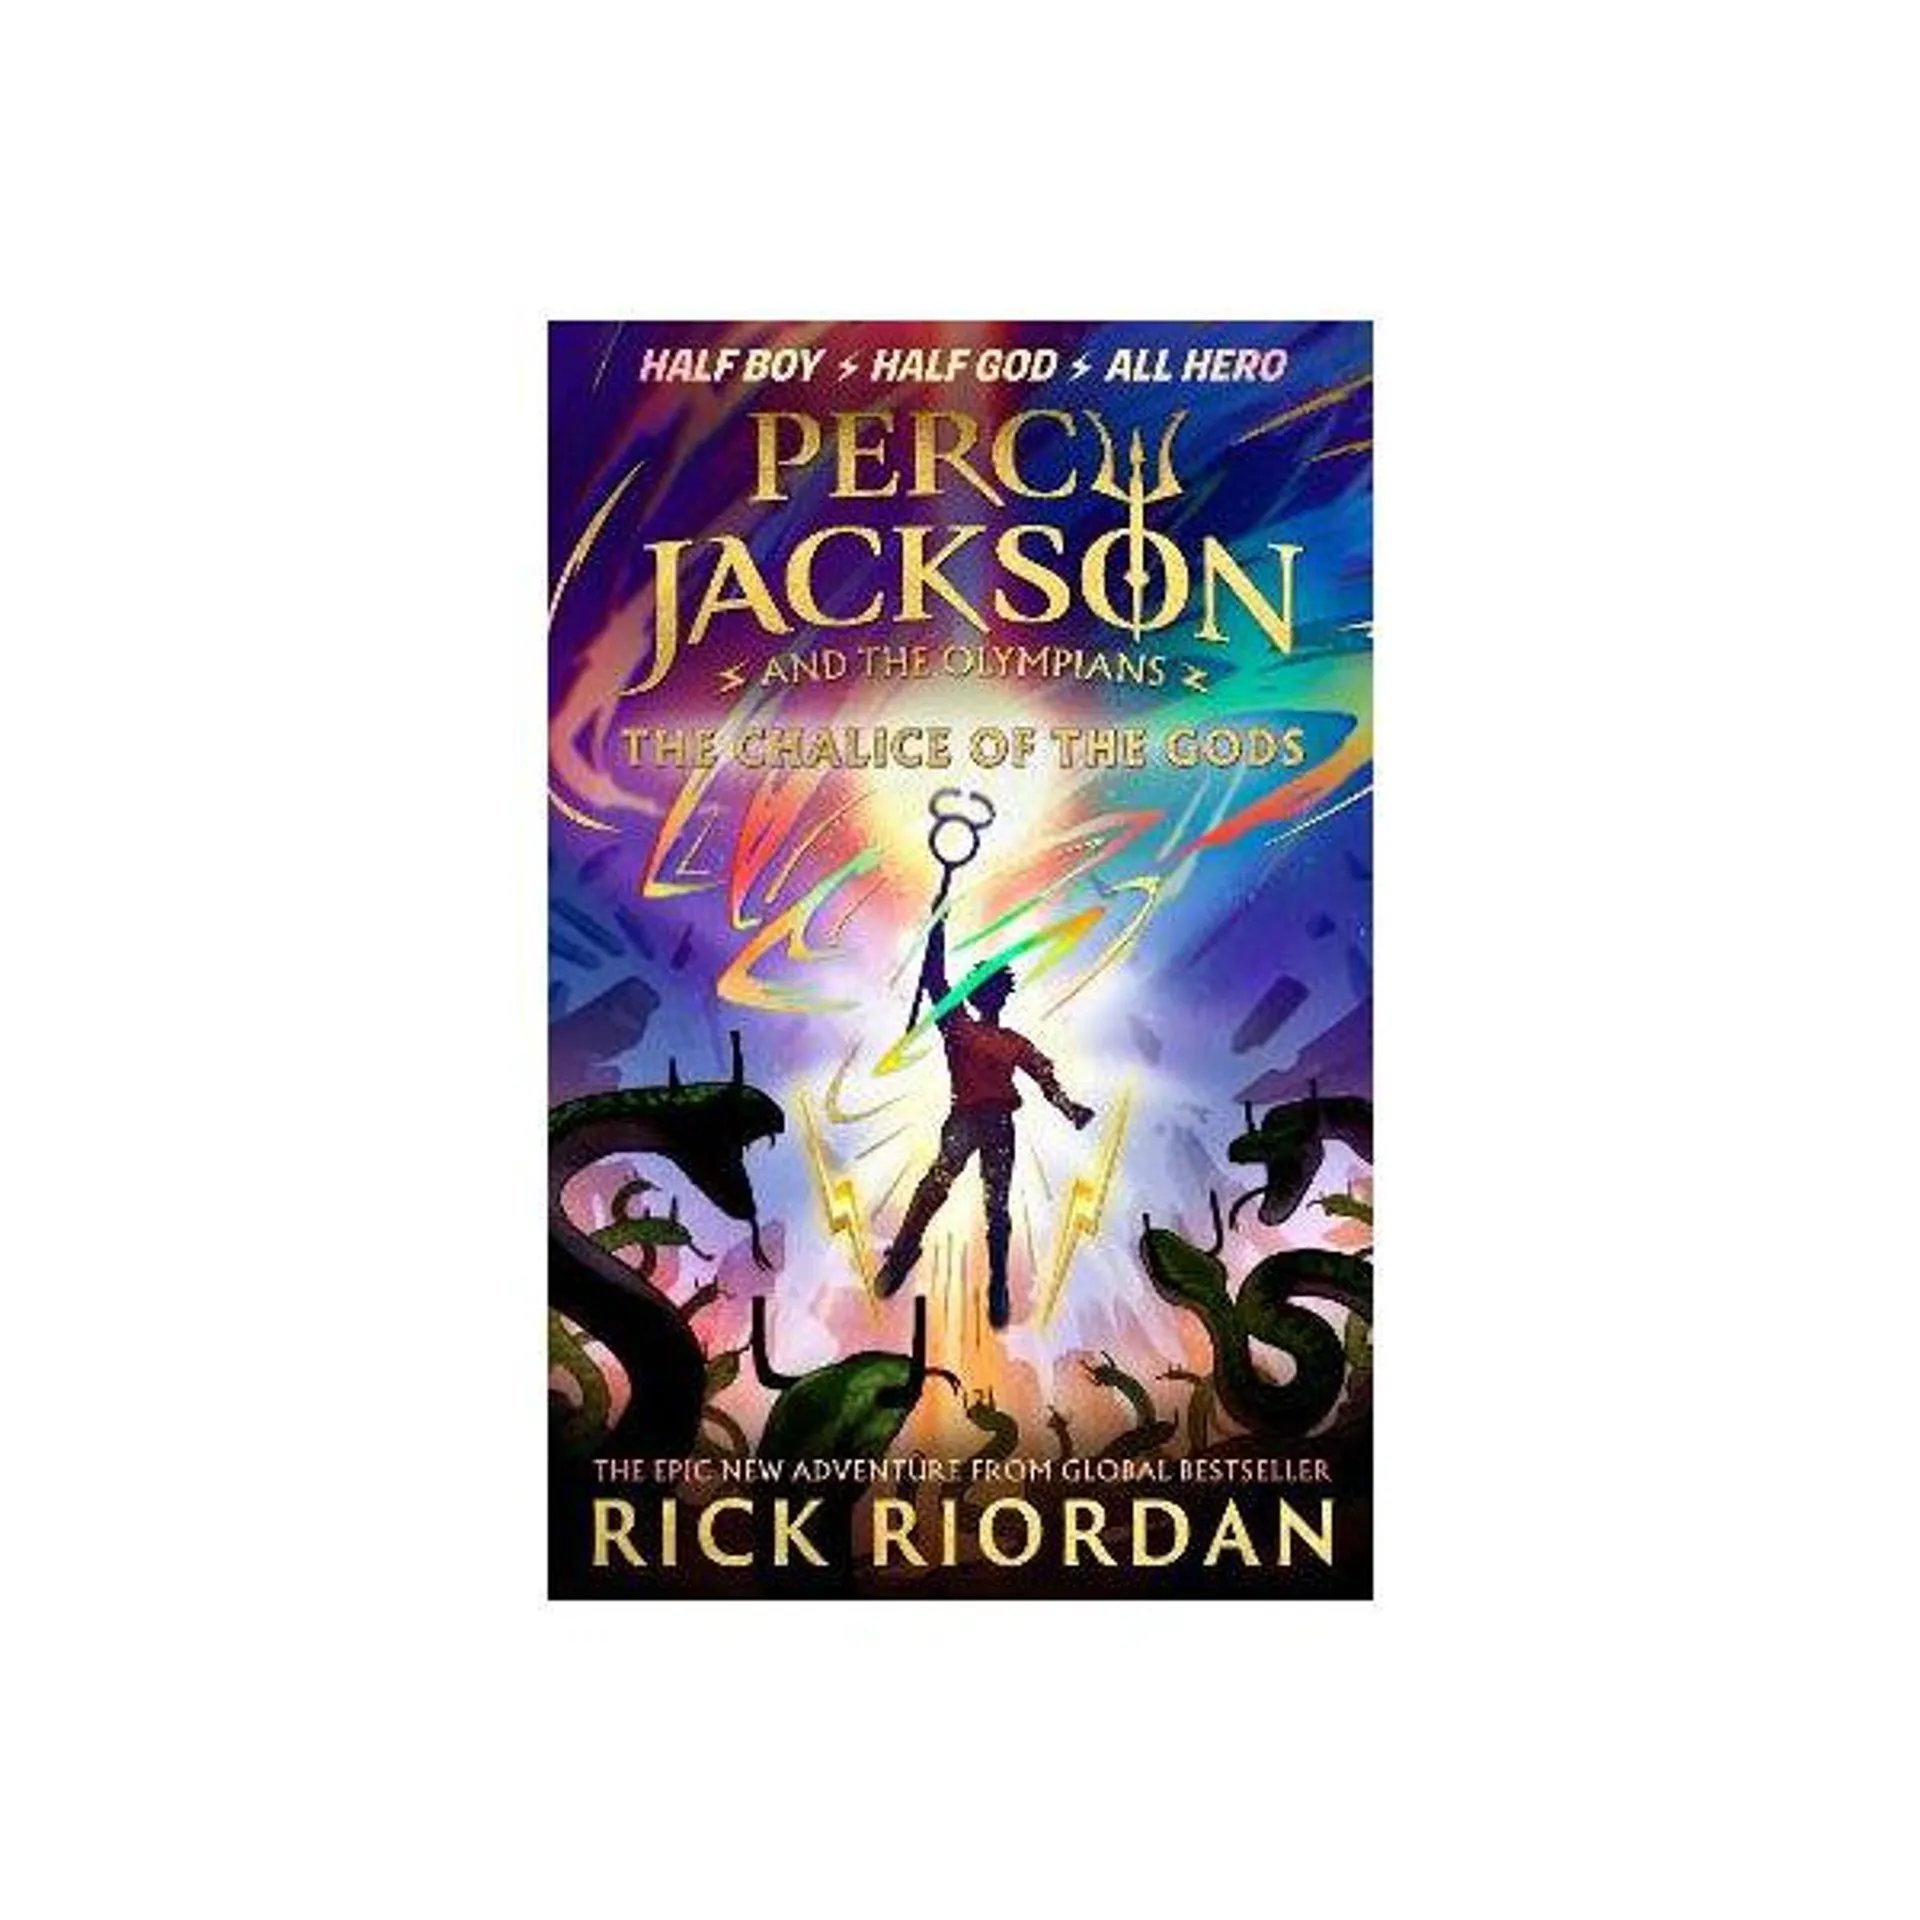 Percy Jackson and the Olympians: The Chalice of the Gods Trade Paperback